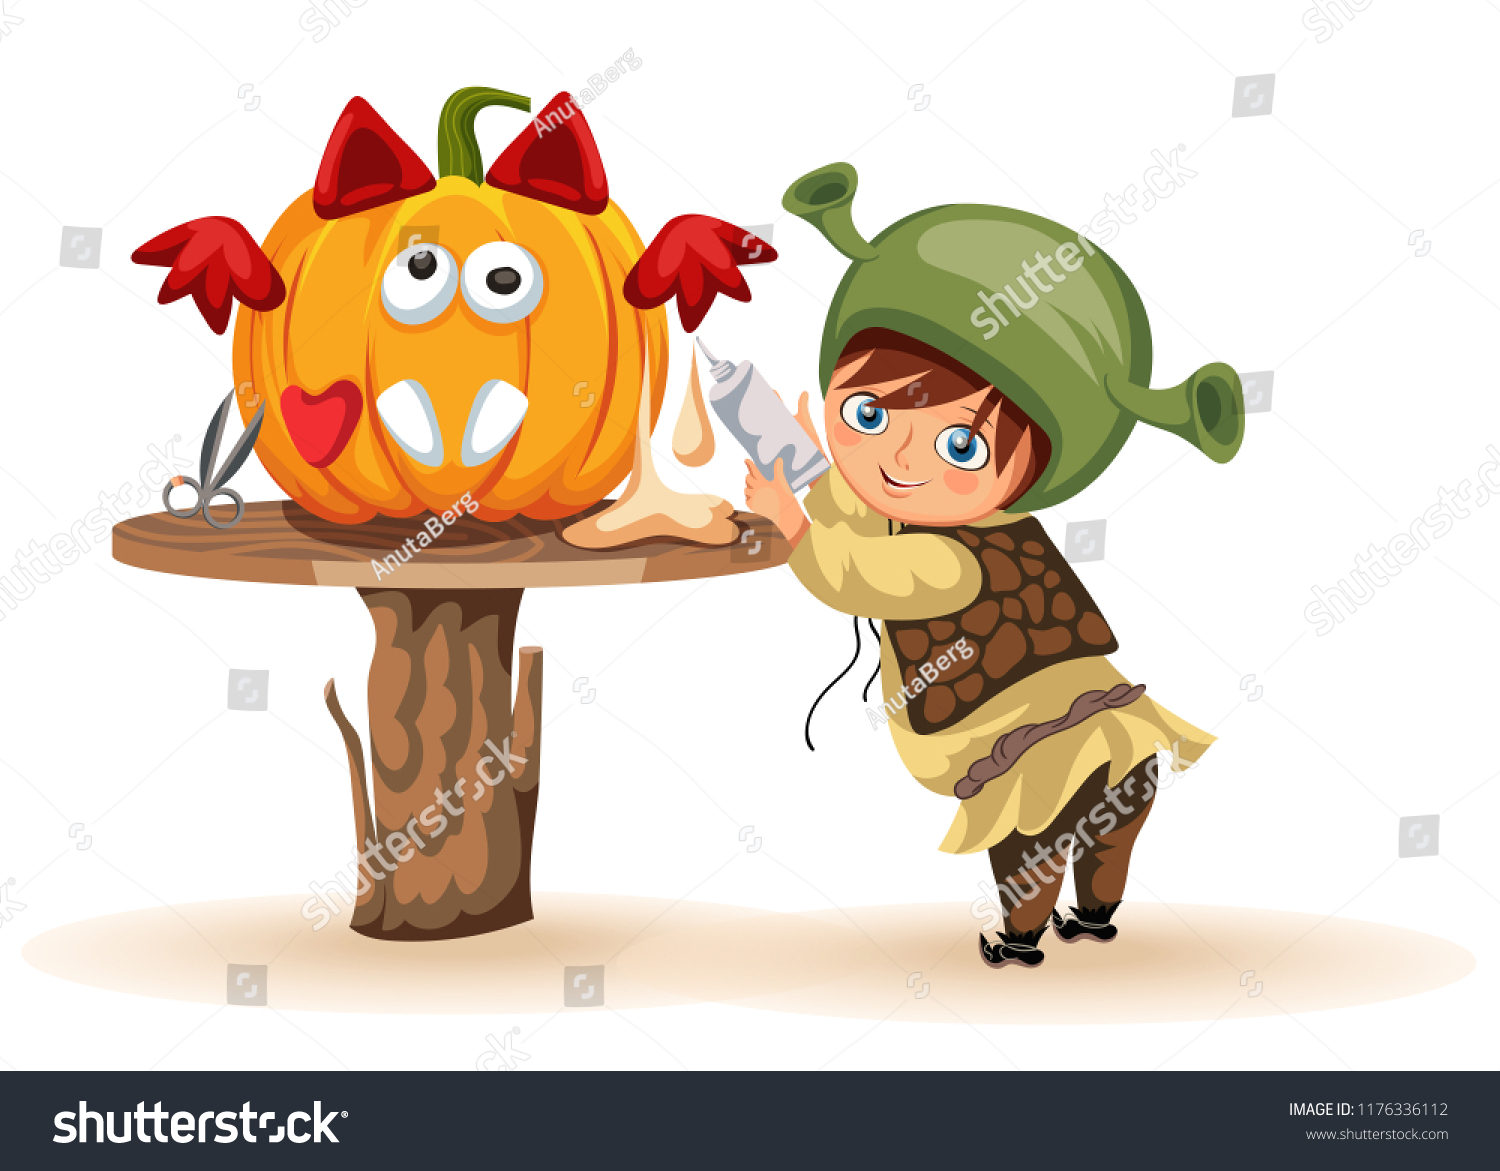 SVG of Cartoon little kid preparing for All Hallows Eve poster. Cheerful child dressed in costume of shrek making Halloween pumpkin vector illustration. Horror party concept. svg